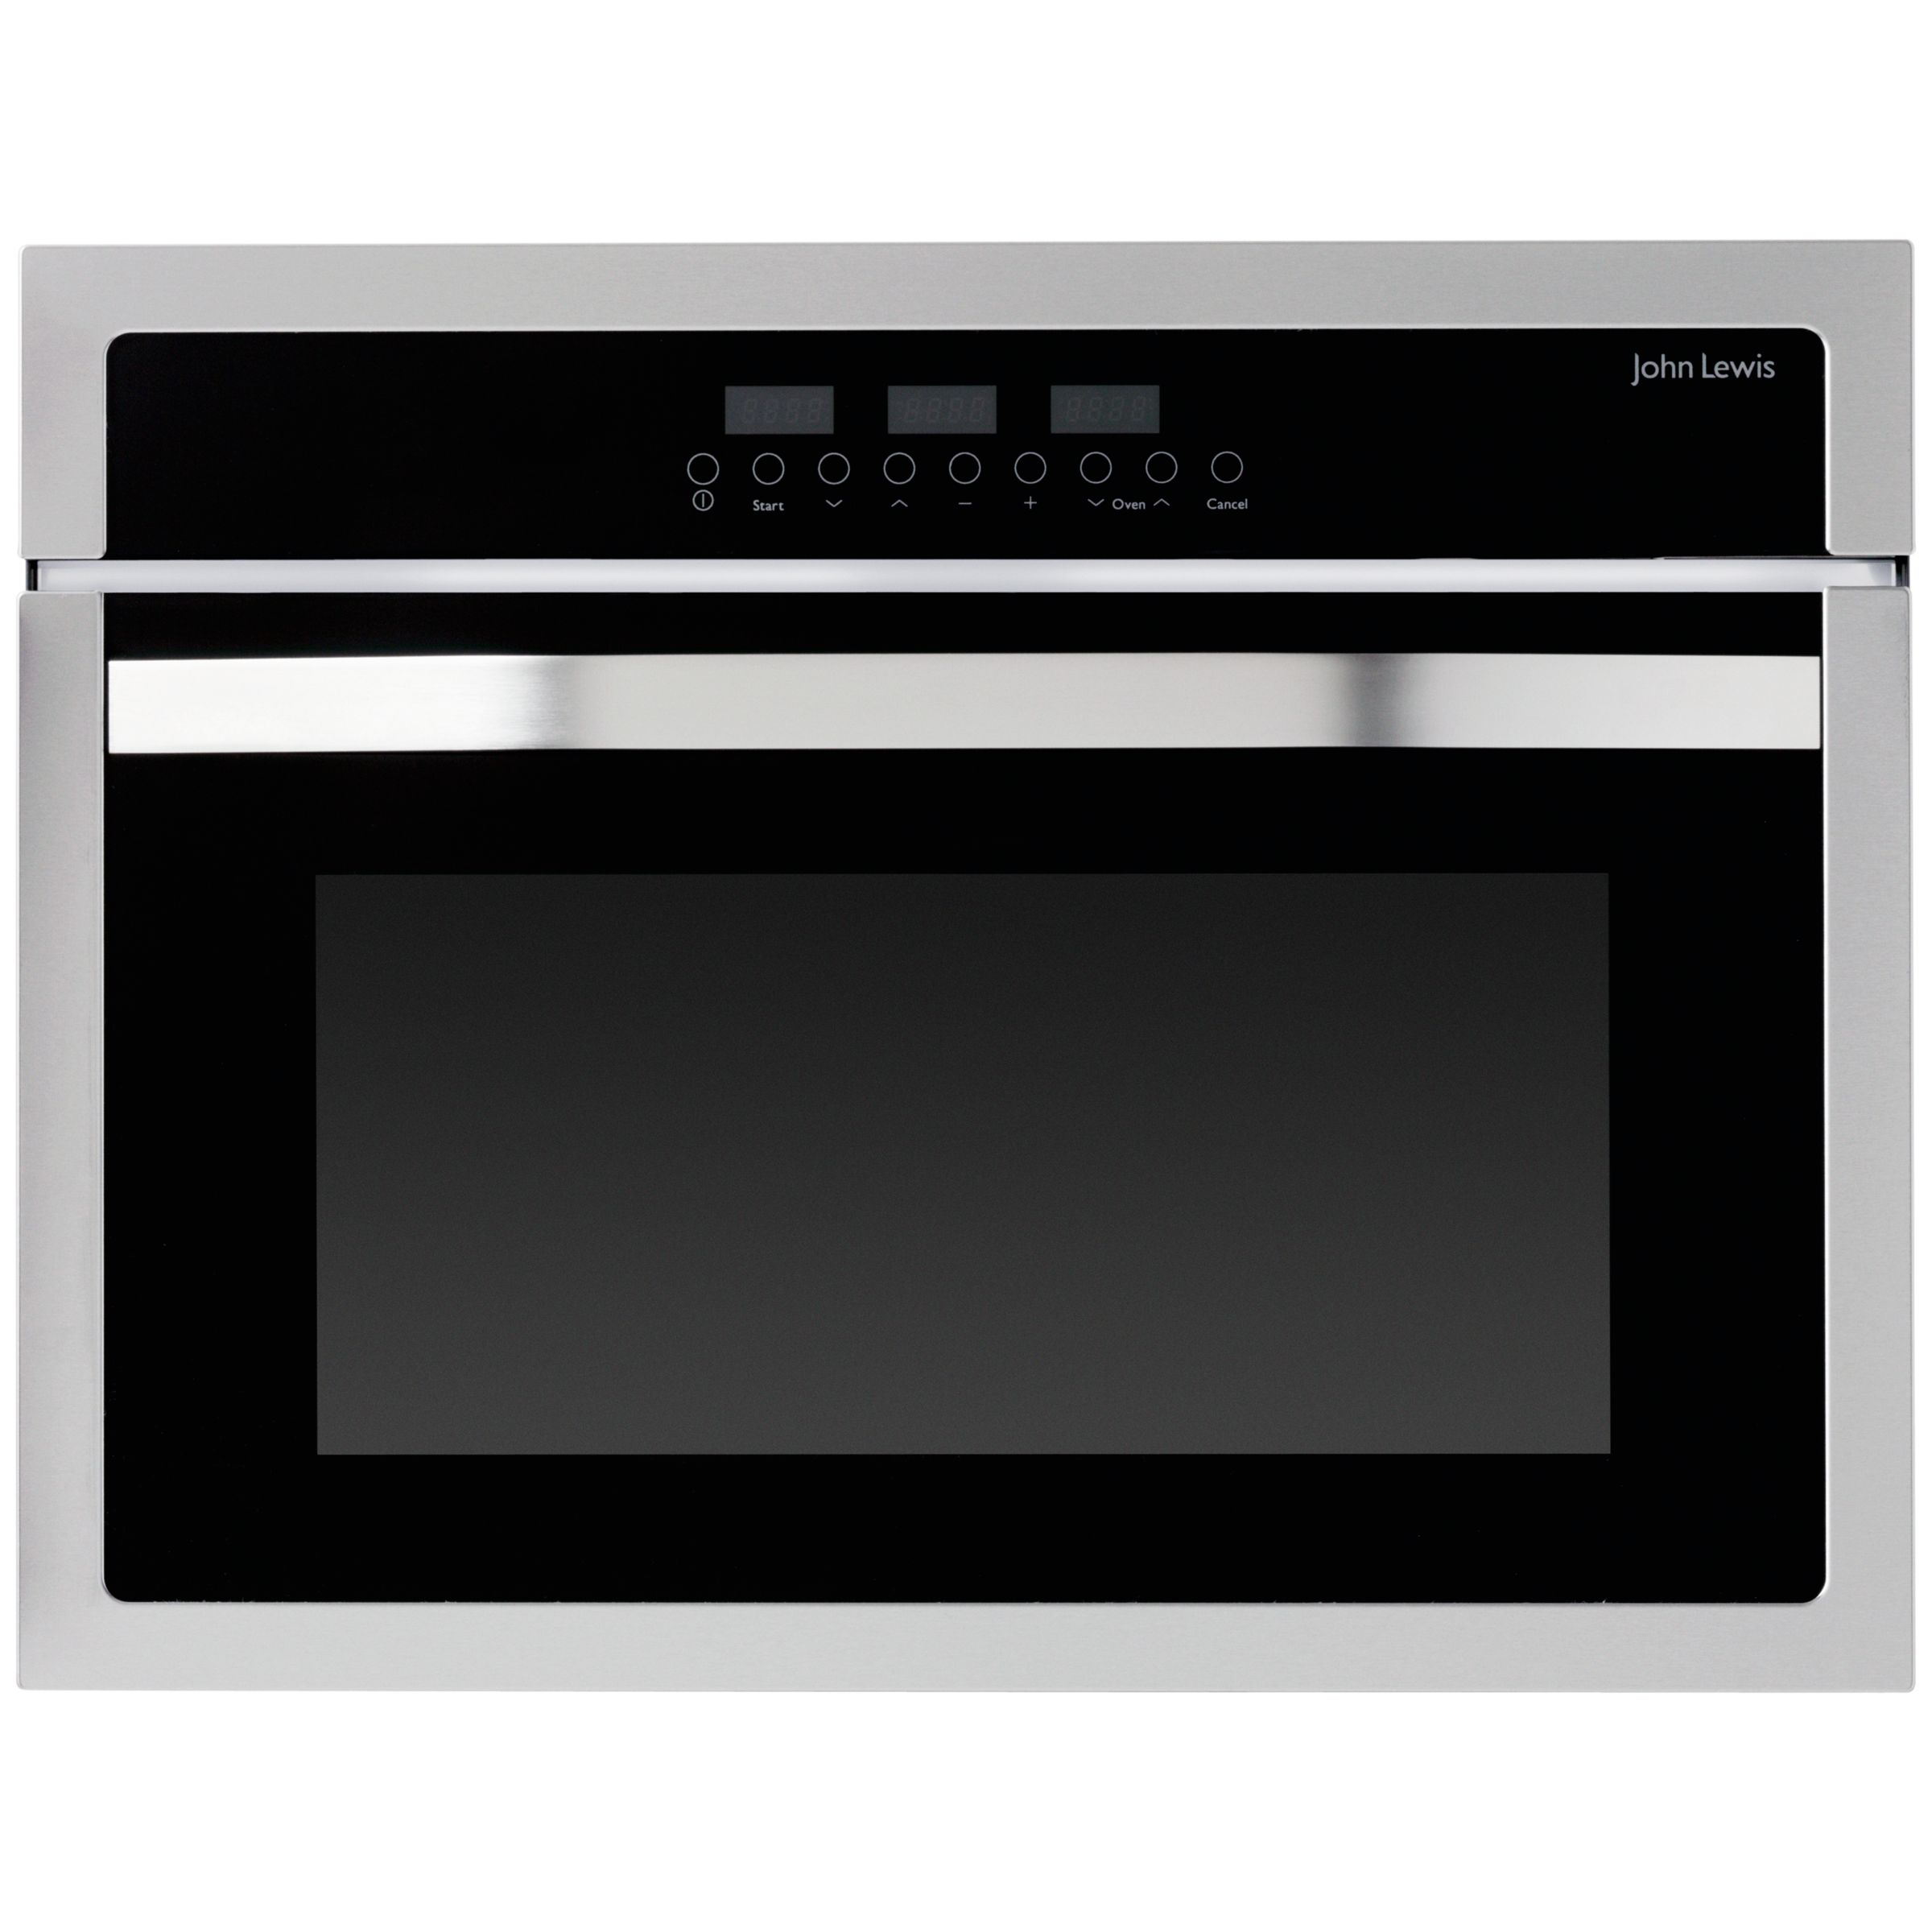 John Lewis JLBIC02 Built-in Combination Microwave, Stainless Steel at John Lewis